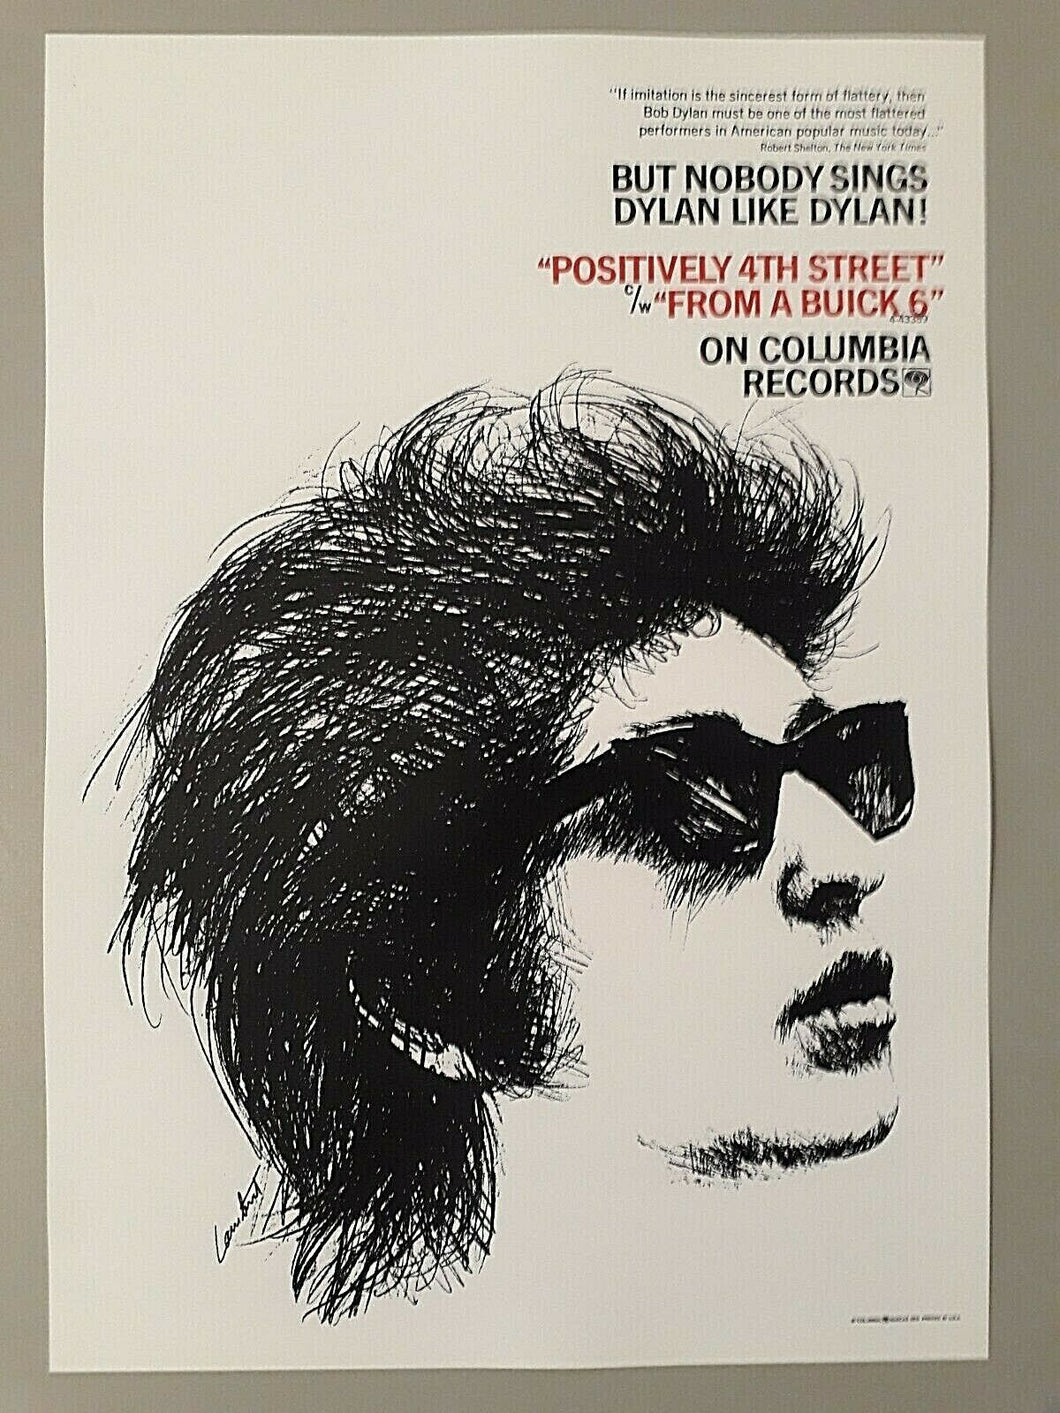 Bob Dylan poster - Positively 4th street music paper promo advert 65 A3 reprint - Original Music and Movie Posters for sale from Bamalama - Online Poster Store UK London